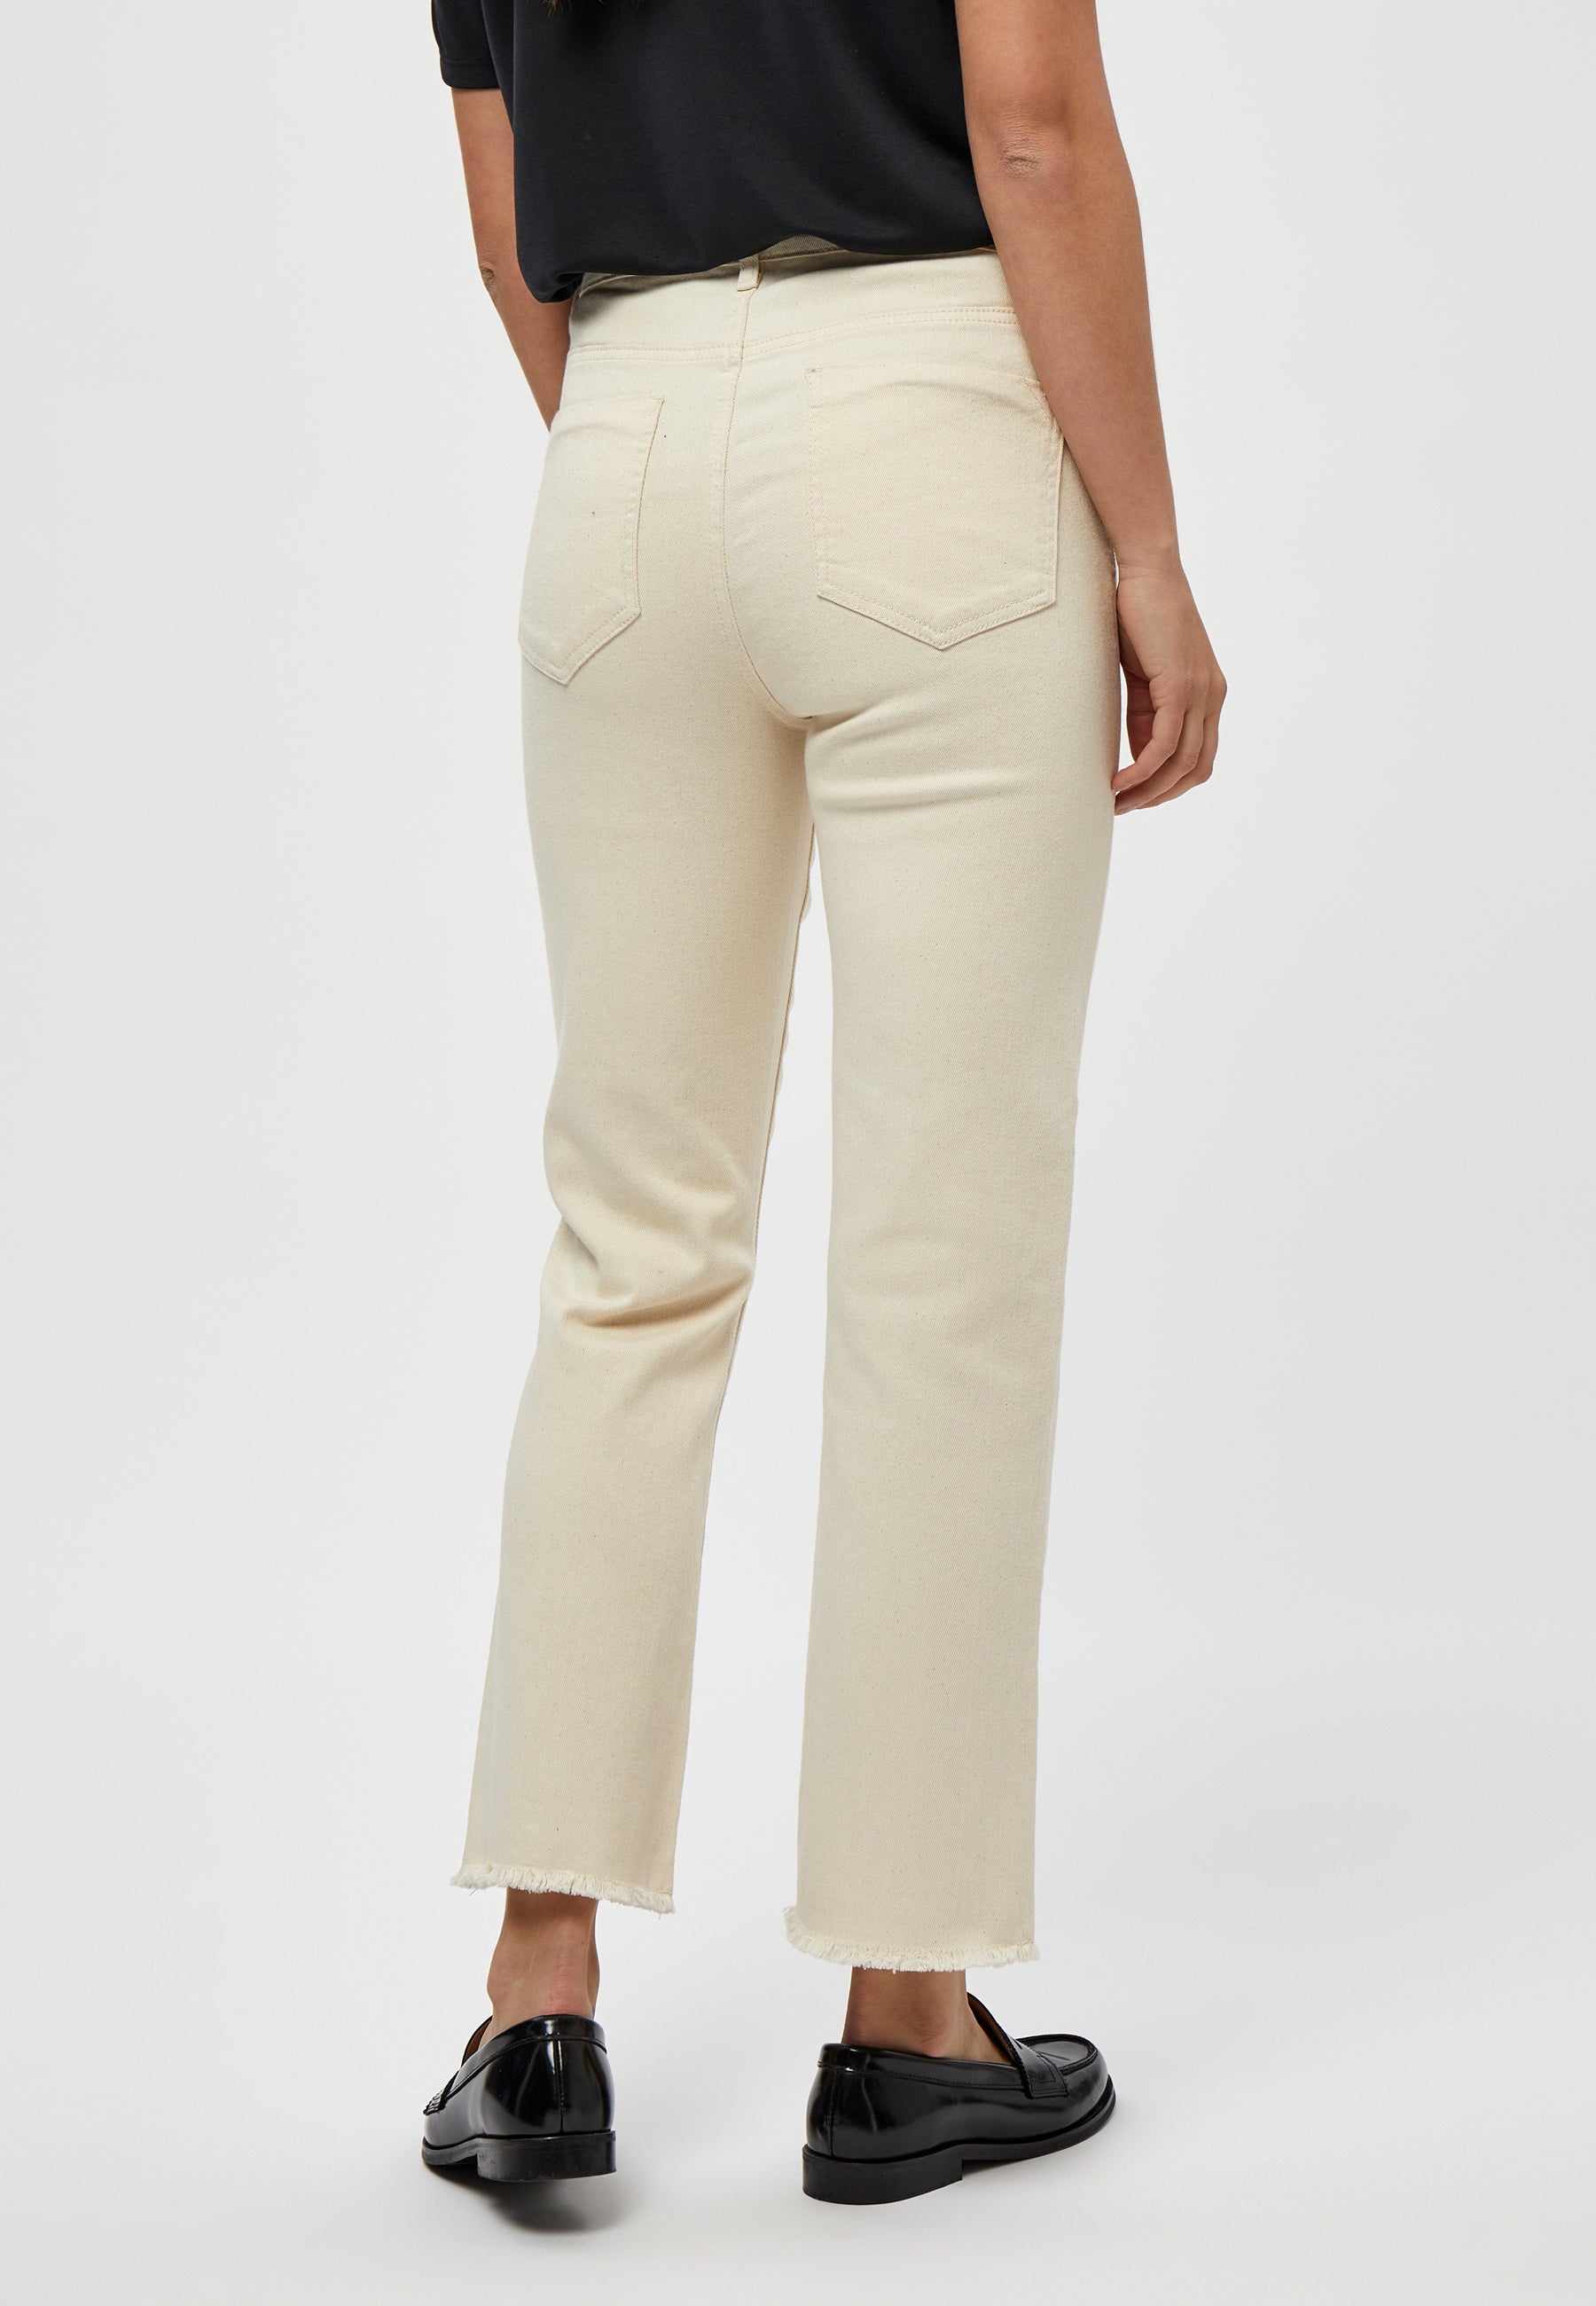 PC6183 Fione Cropped Jeans - Seedpearl Cream